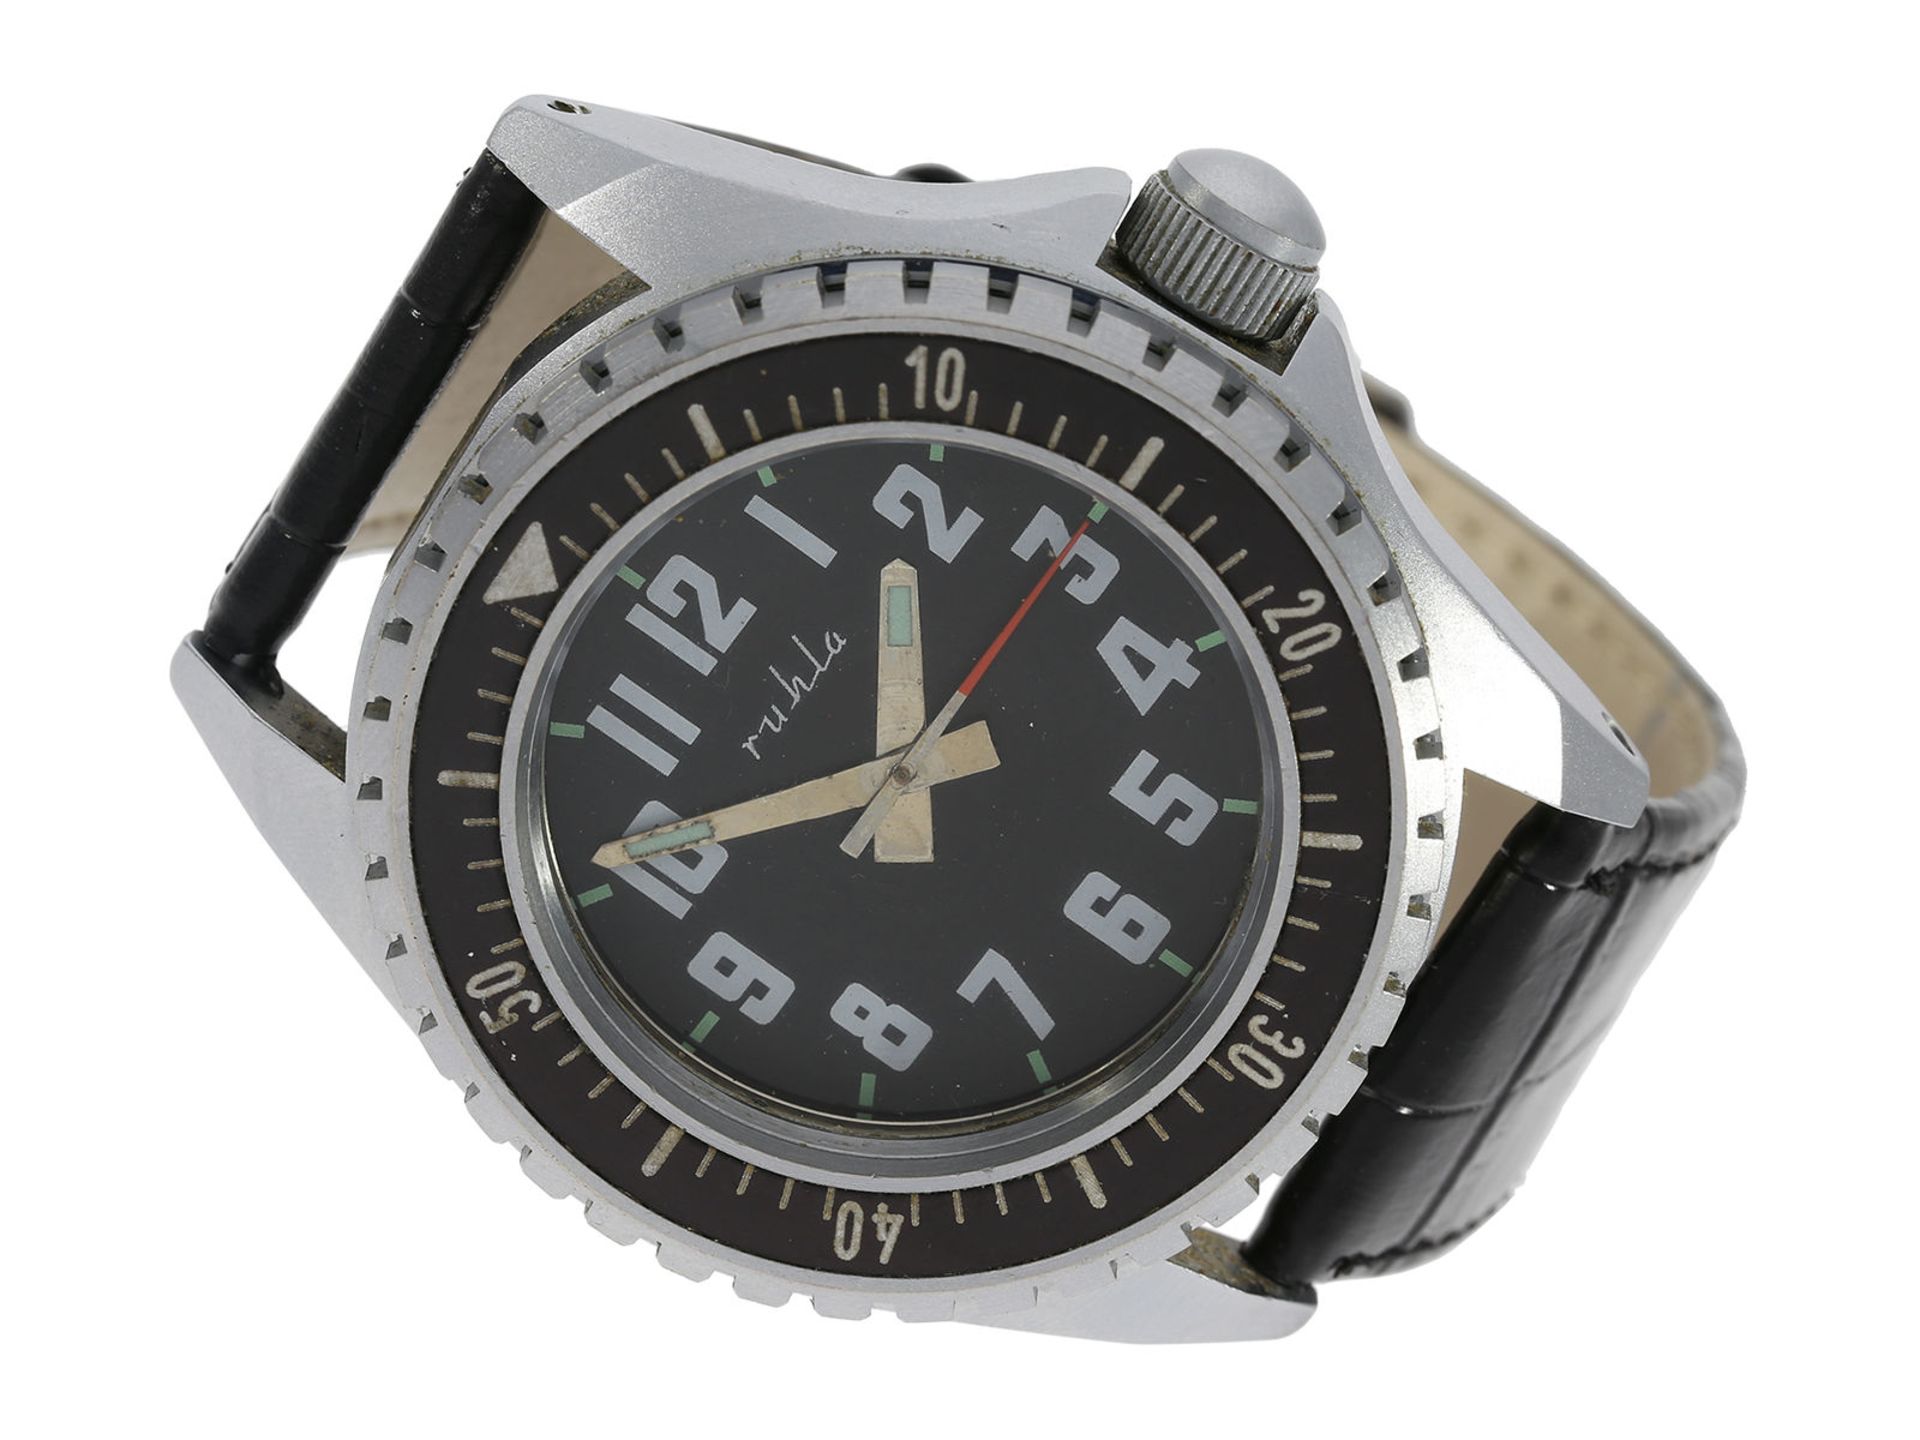 Wristwatch: extremely rare Ruhla combat swimmer watch, made for the "Nationale Volksarmee", one of